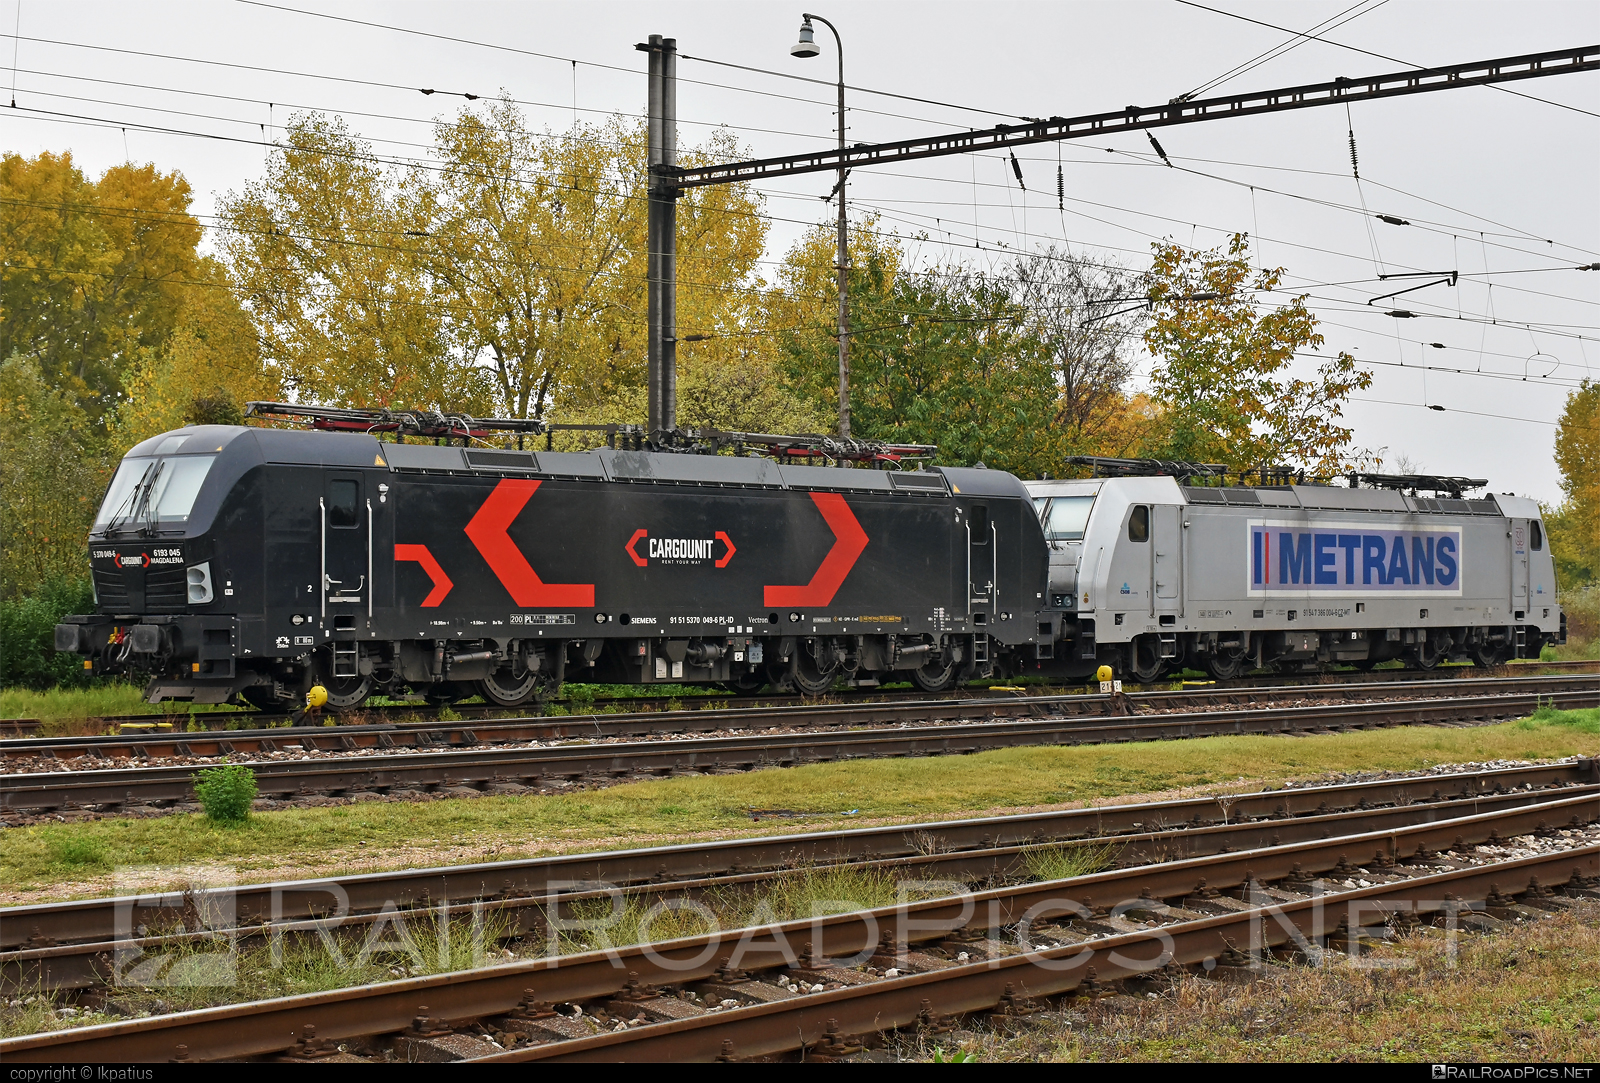 Siemens Vectron MS - 5 370 049-6 operated by METRANS, a.s. #IndustrialDivision #cargounit #hhla #metrans #siemens #siemensVectron #siemensVectronMS #vectron #vectronMS